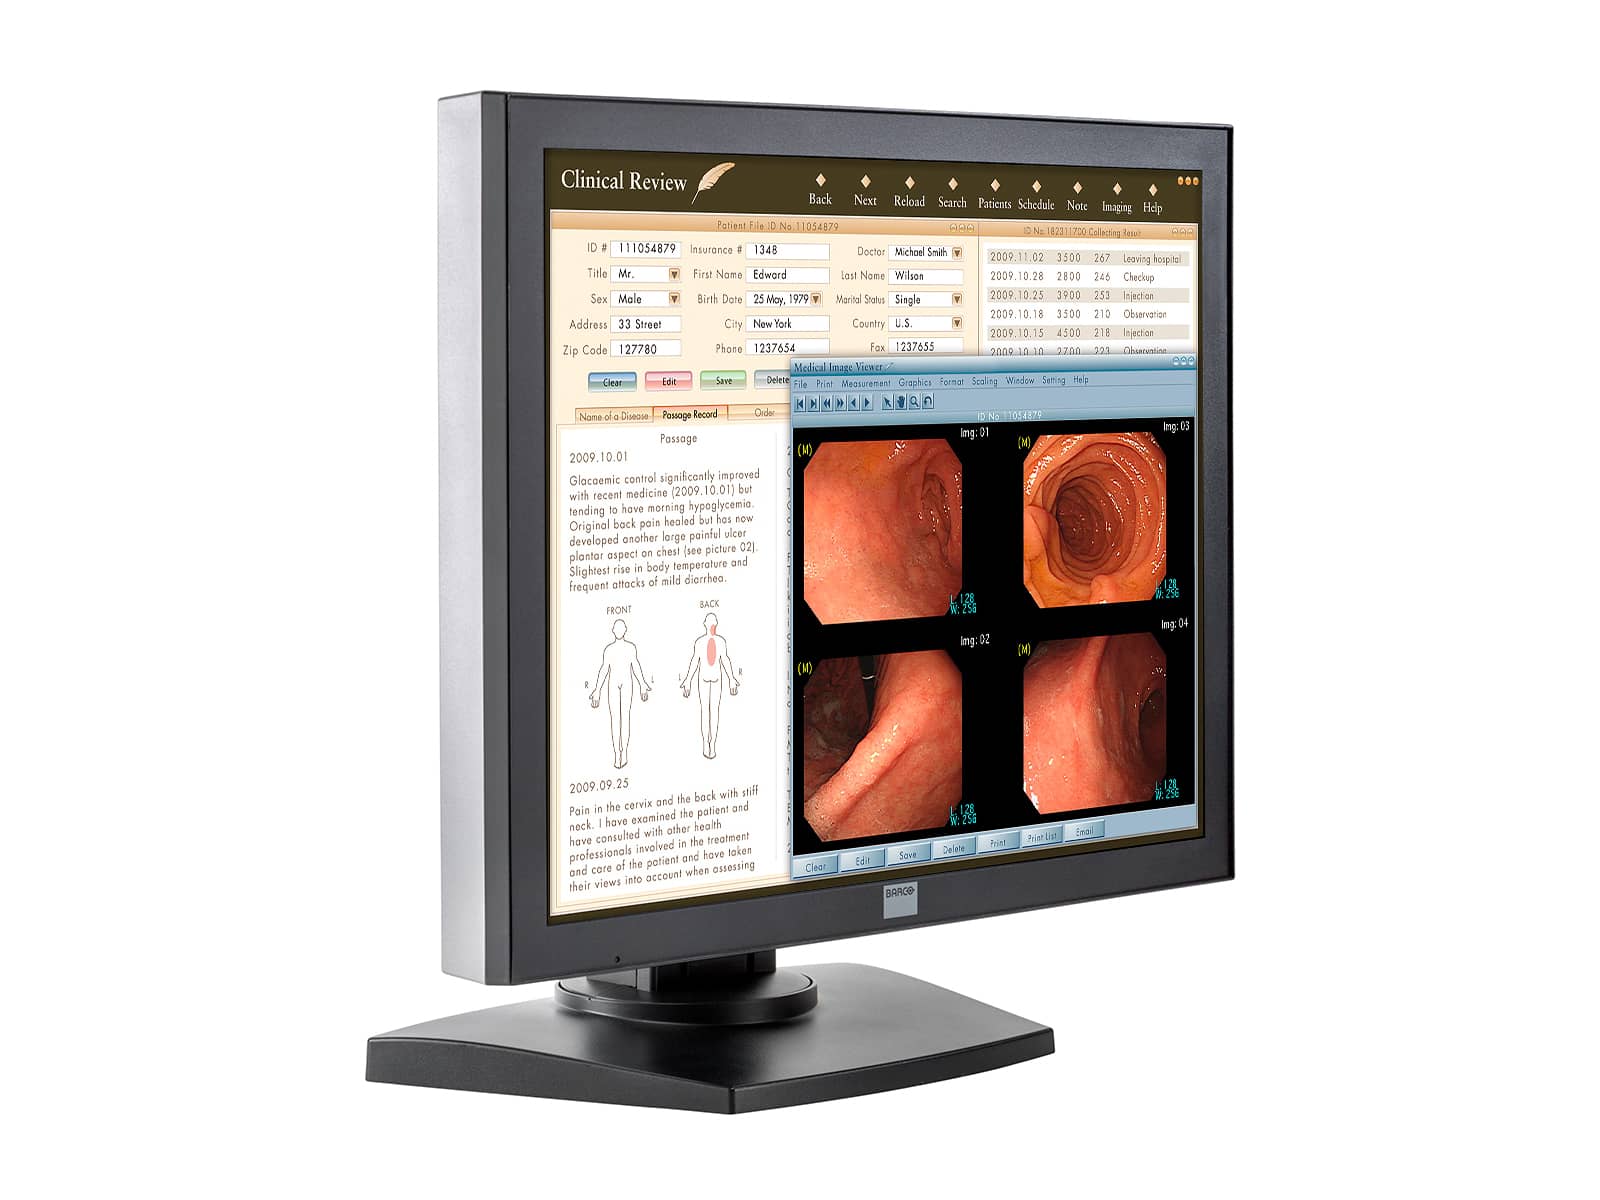 Barco MDRC-2120 2MP 20" Color Clinical Review Monitor Monitors.com 